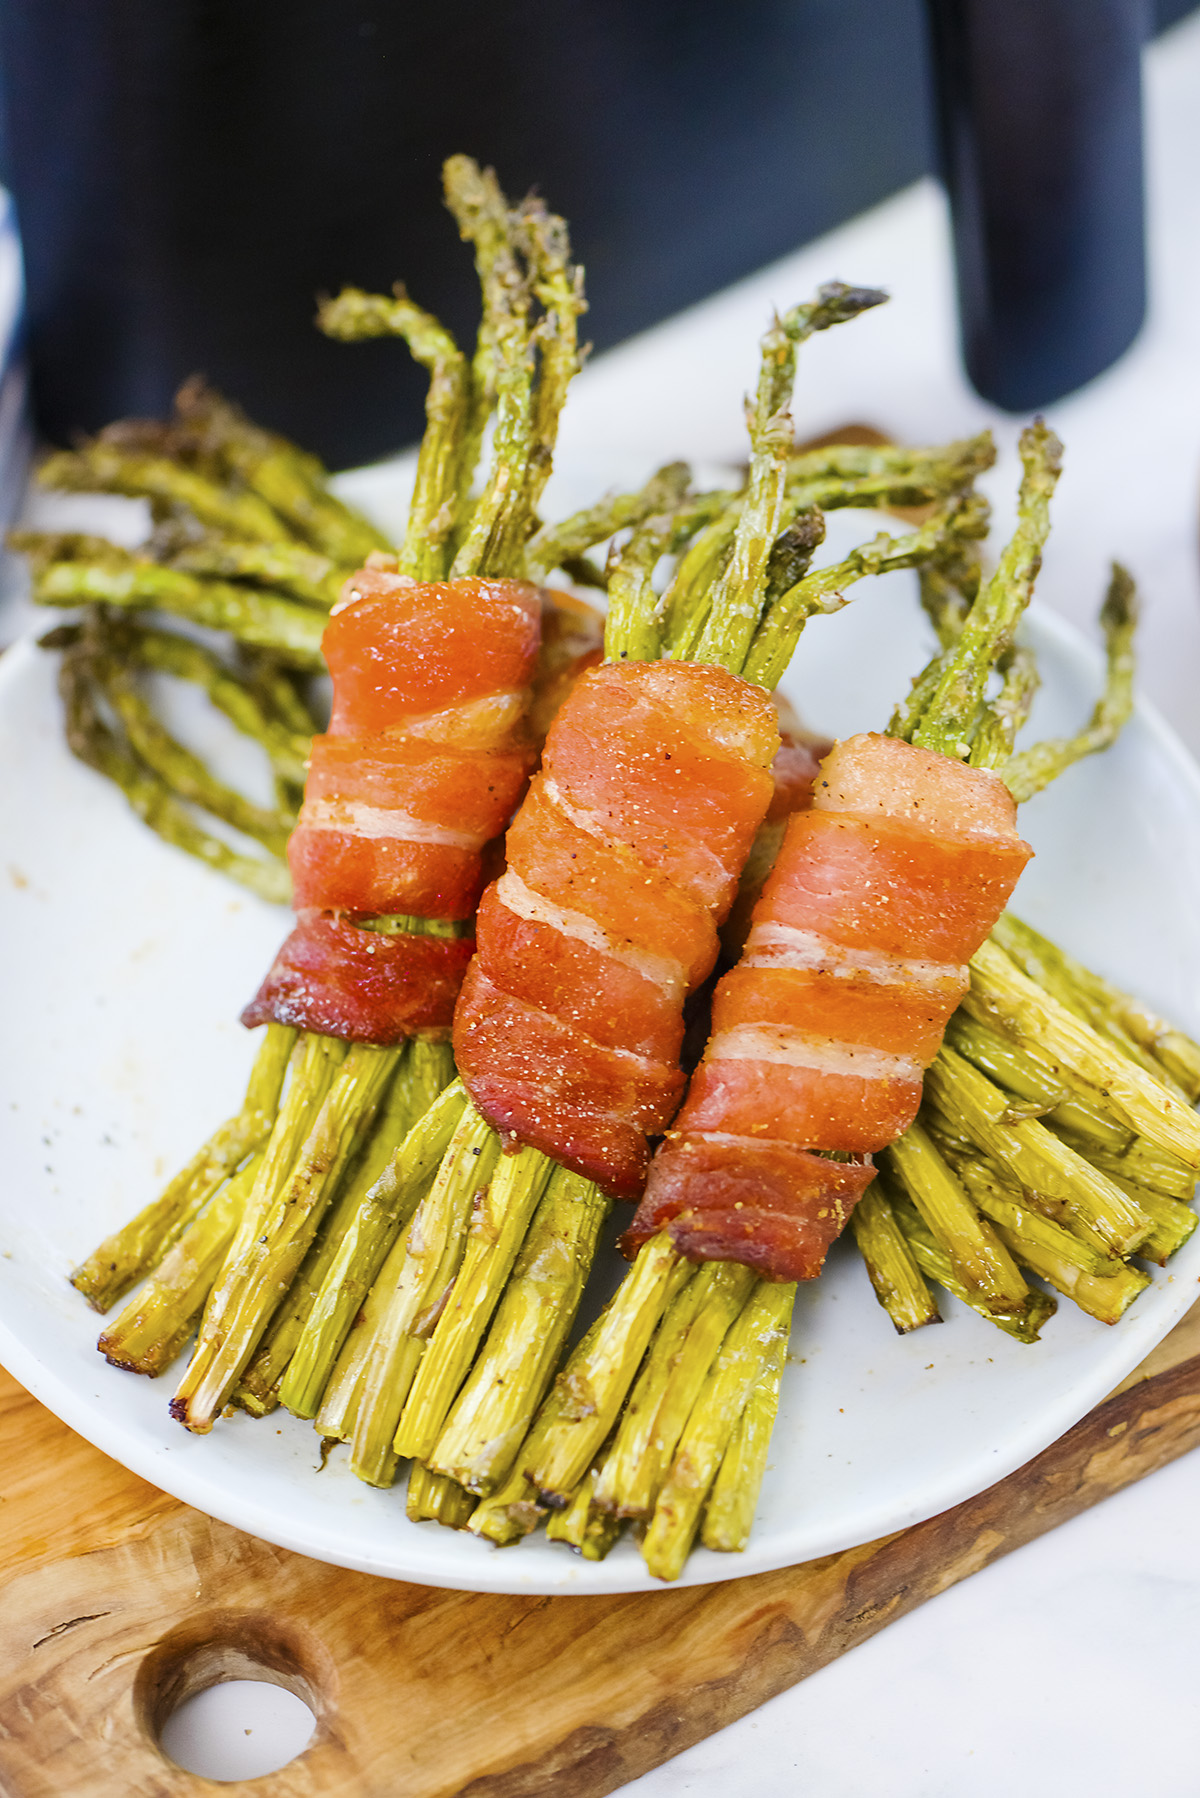 Bacon wrapped asparagus stacked on a white plate.